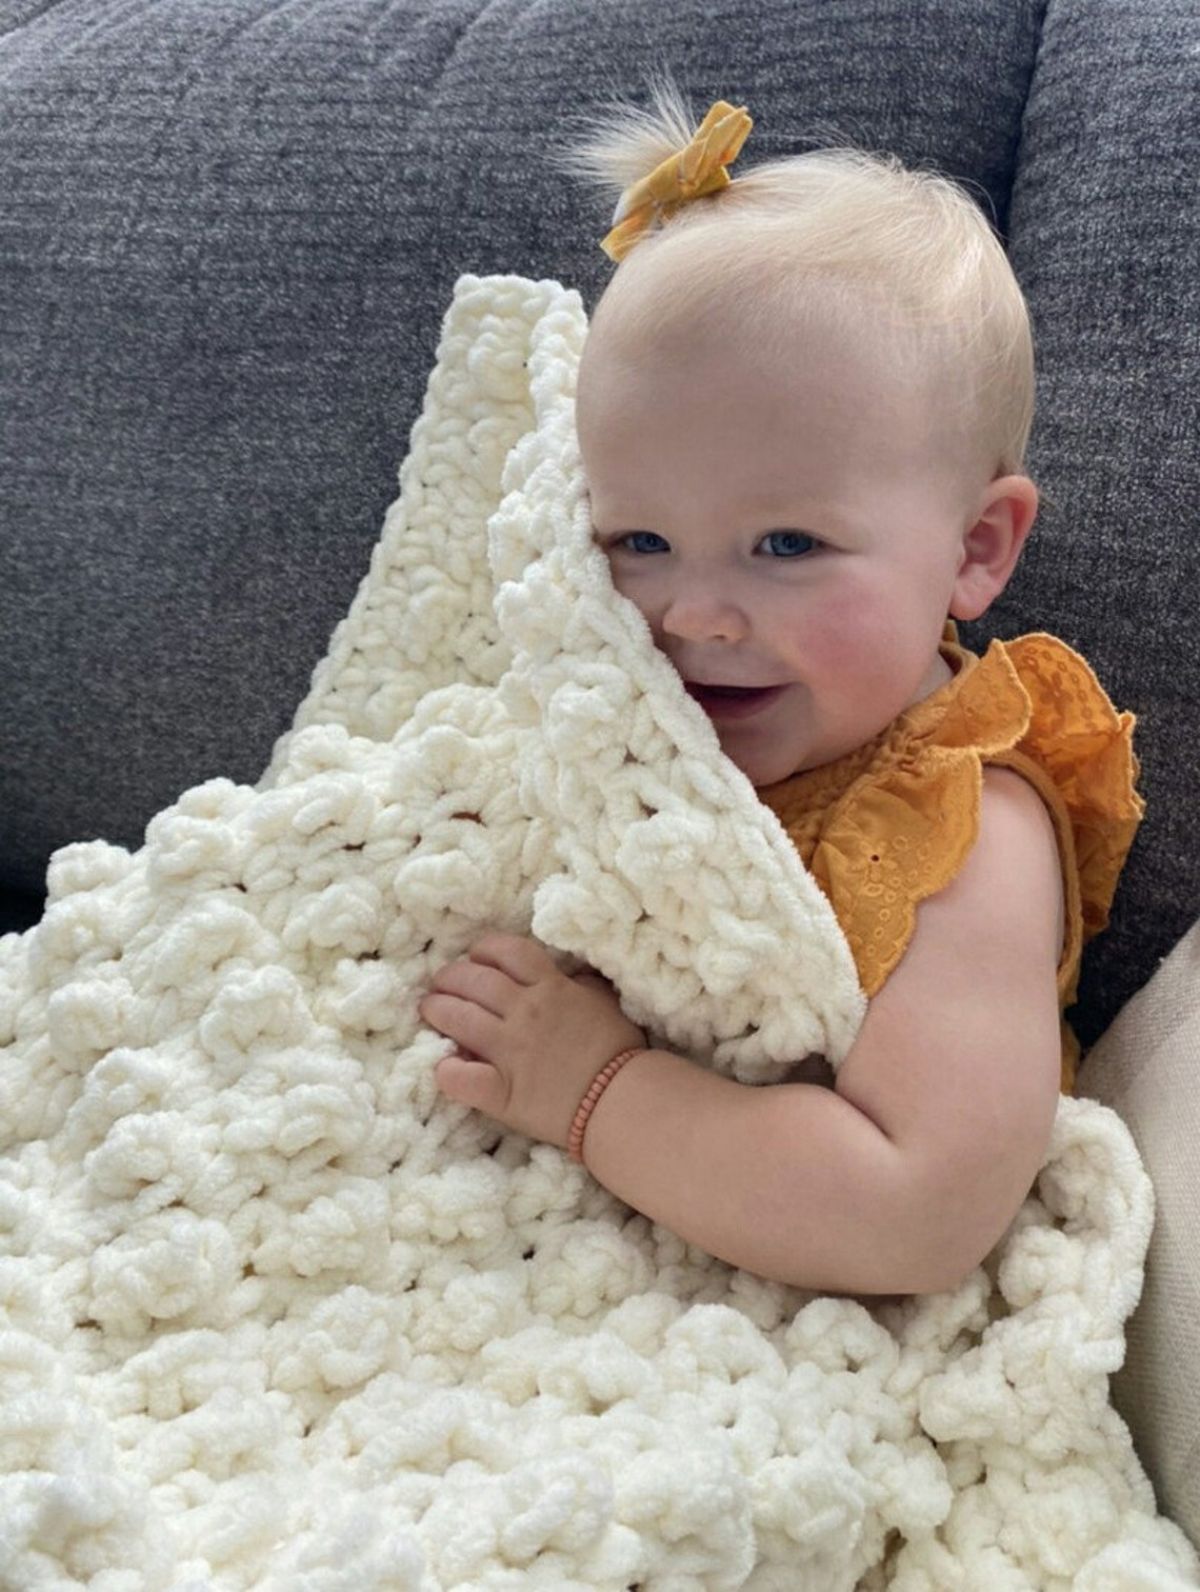 Smiling baby in a yellow dress and matching scrunchie under a chunky cream crochet blanket sitting on a gray fabric sofa.